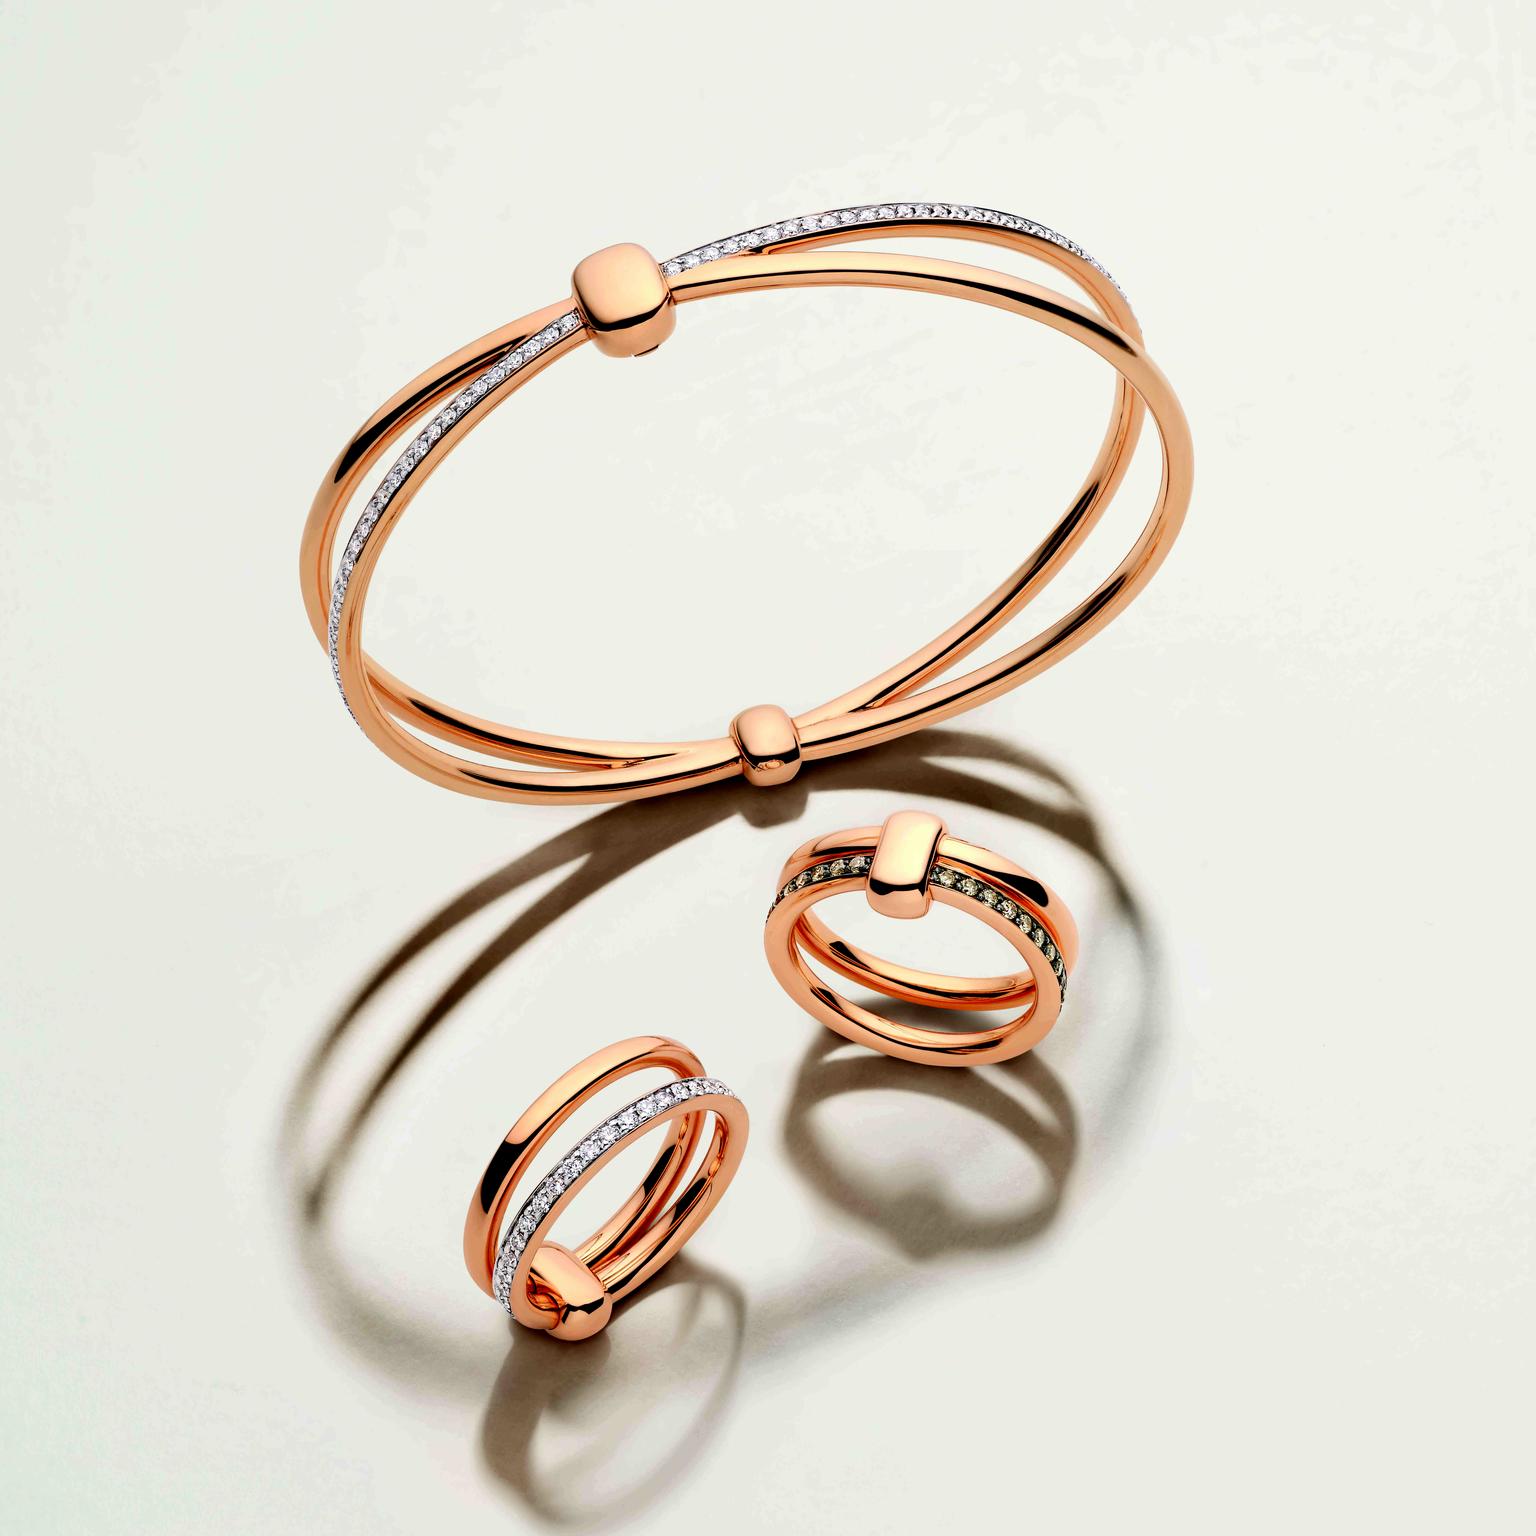 POMELLATO TOGETHER bracelet and rings by Pomellato